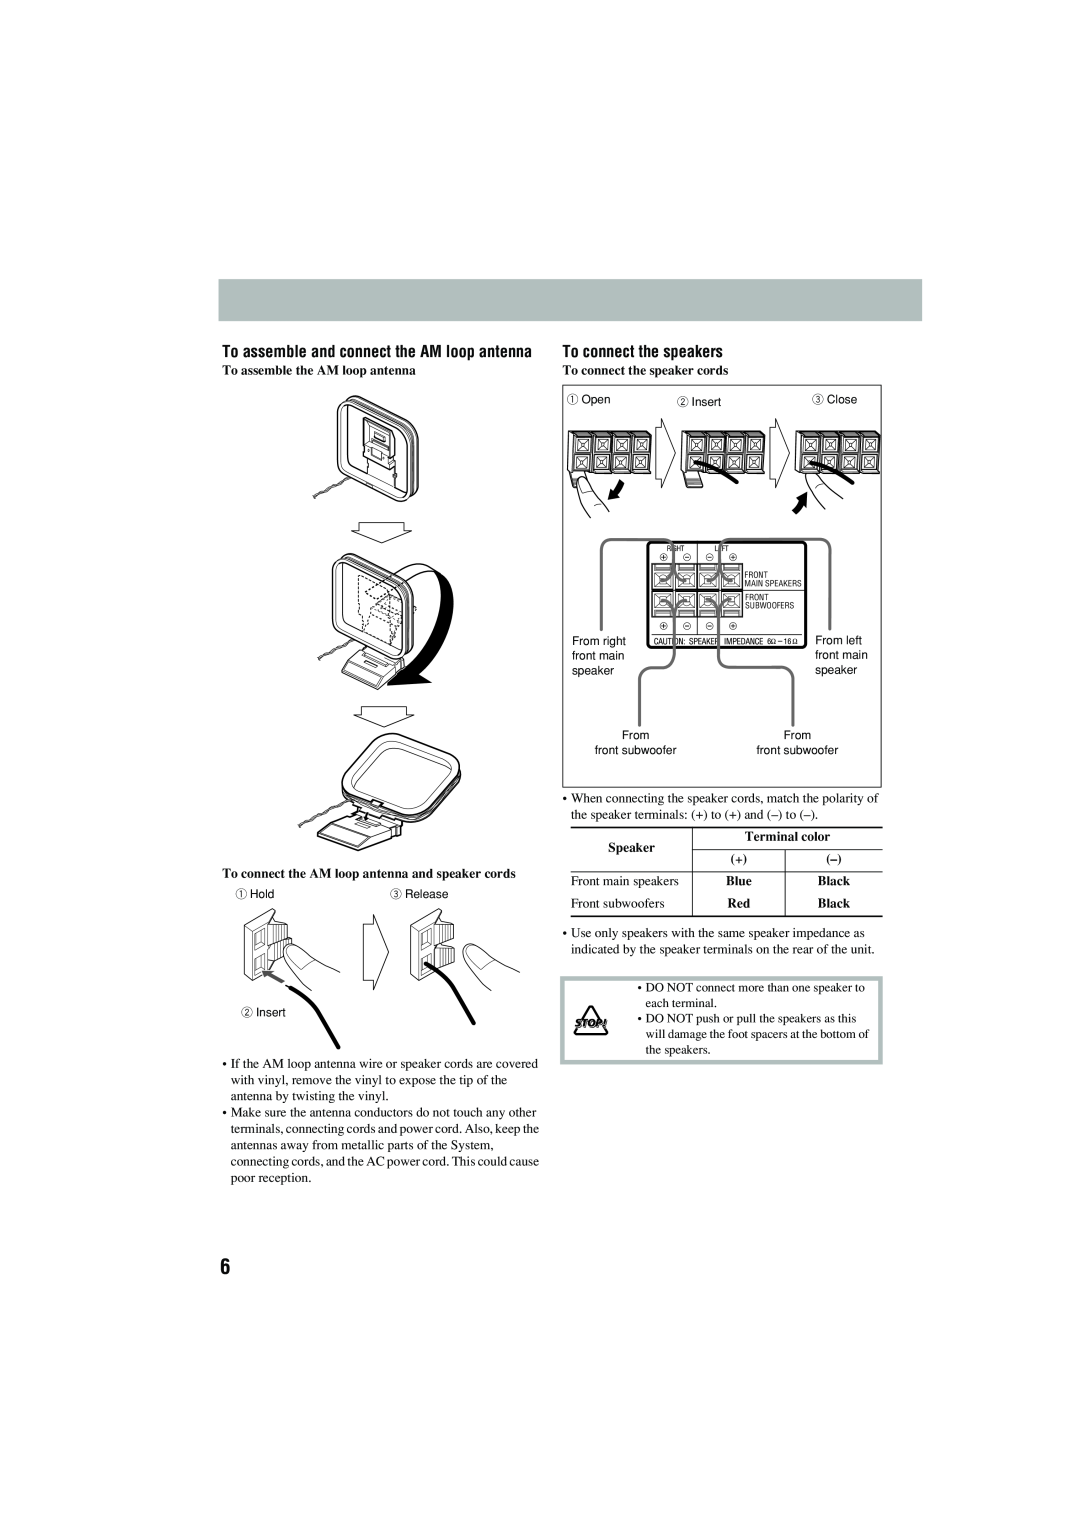 JVC CA-MXJD5 manual To connect the speakers, To assemble and connect the AM loop antenna, To assemble the AM loop antenna 